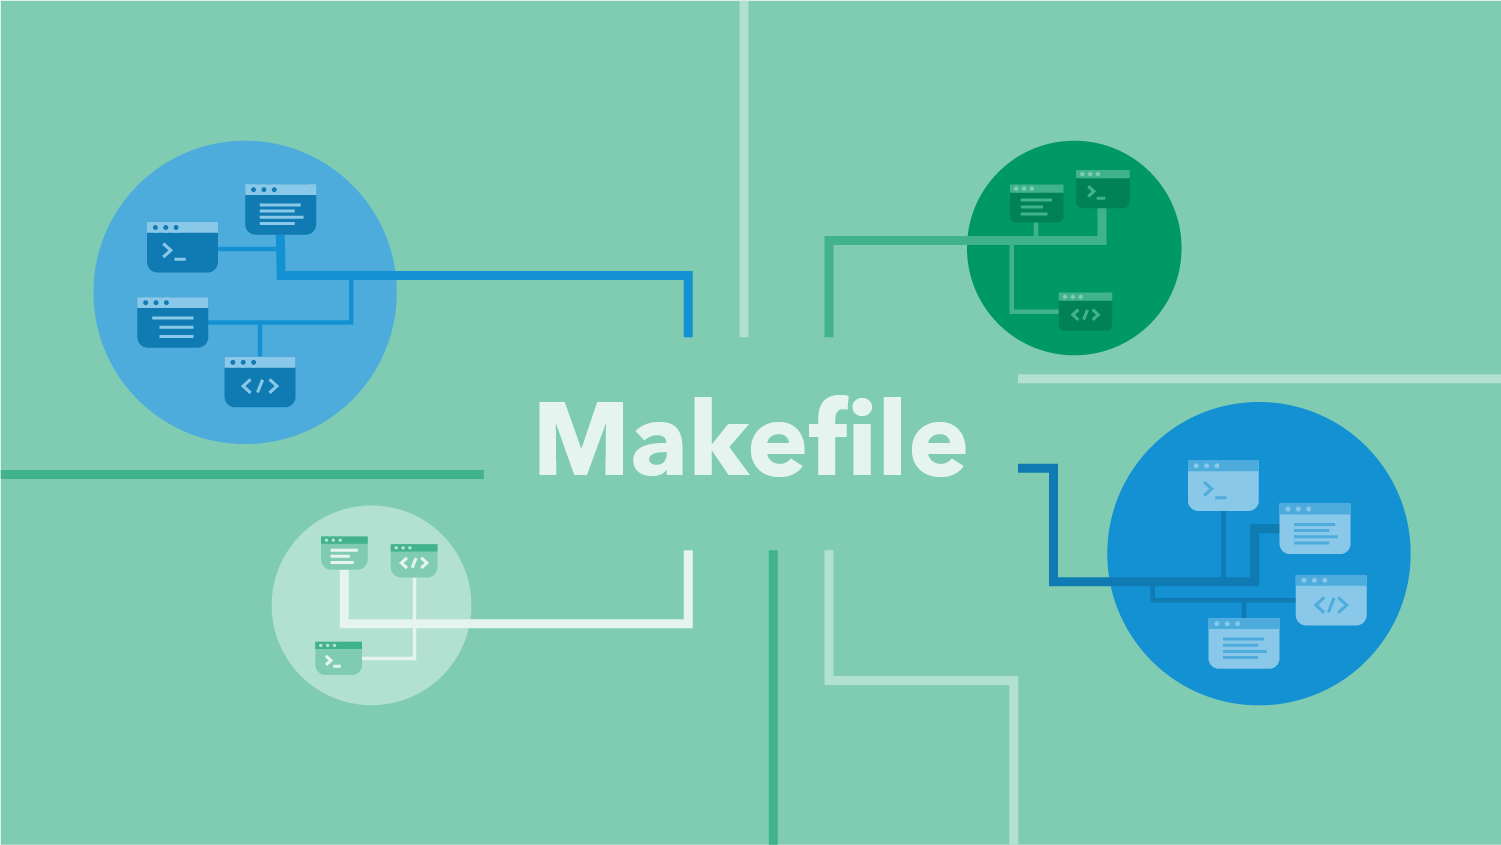 Read Makefiles in 2019 — Why They Still Matter